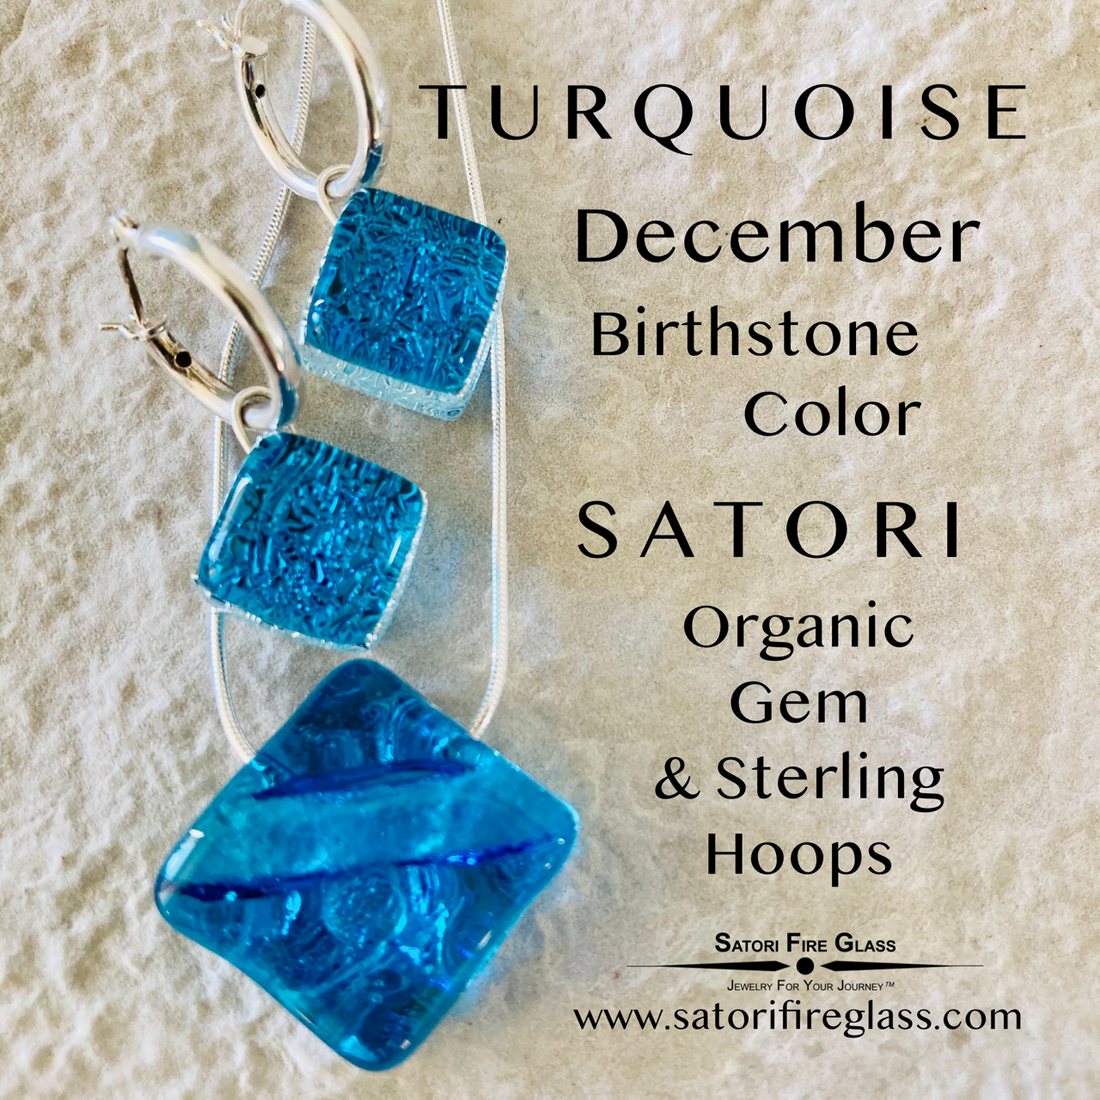 Turquoise is the Birthstone Color for December